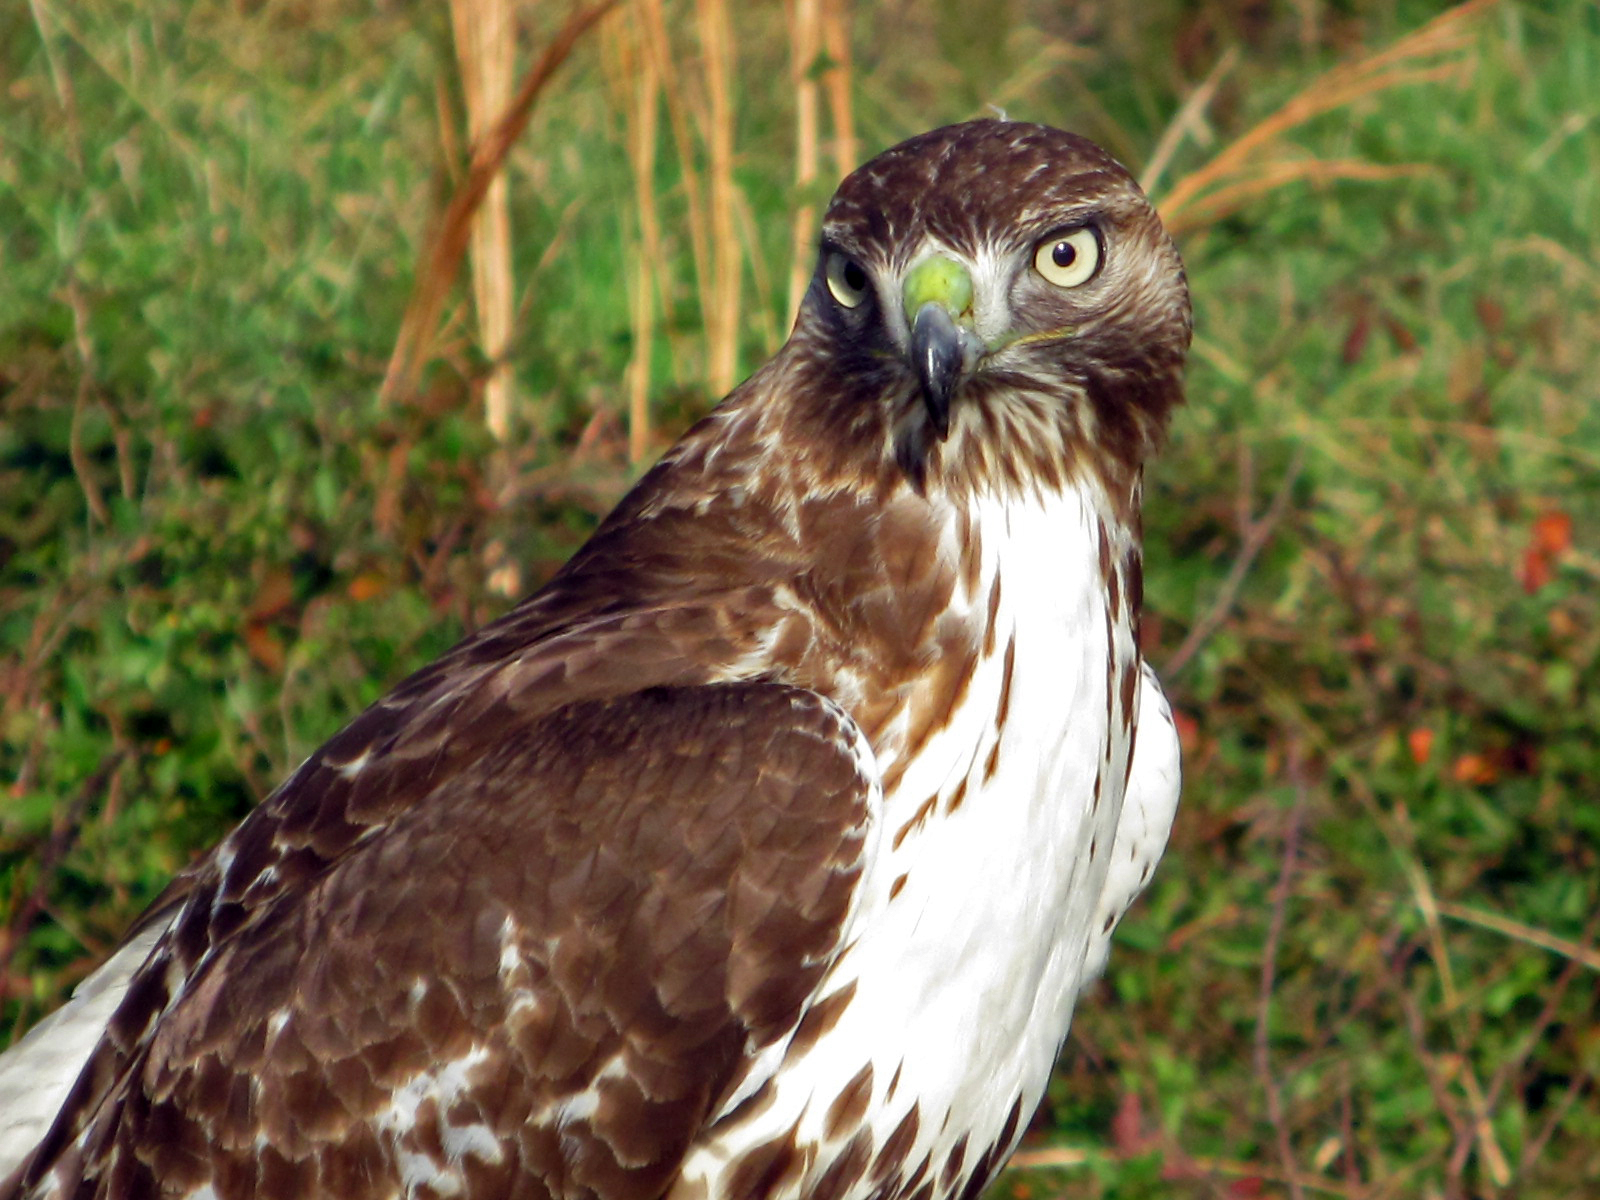 Closeup view of the torso of a red-tailed hawk standing on the ground